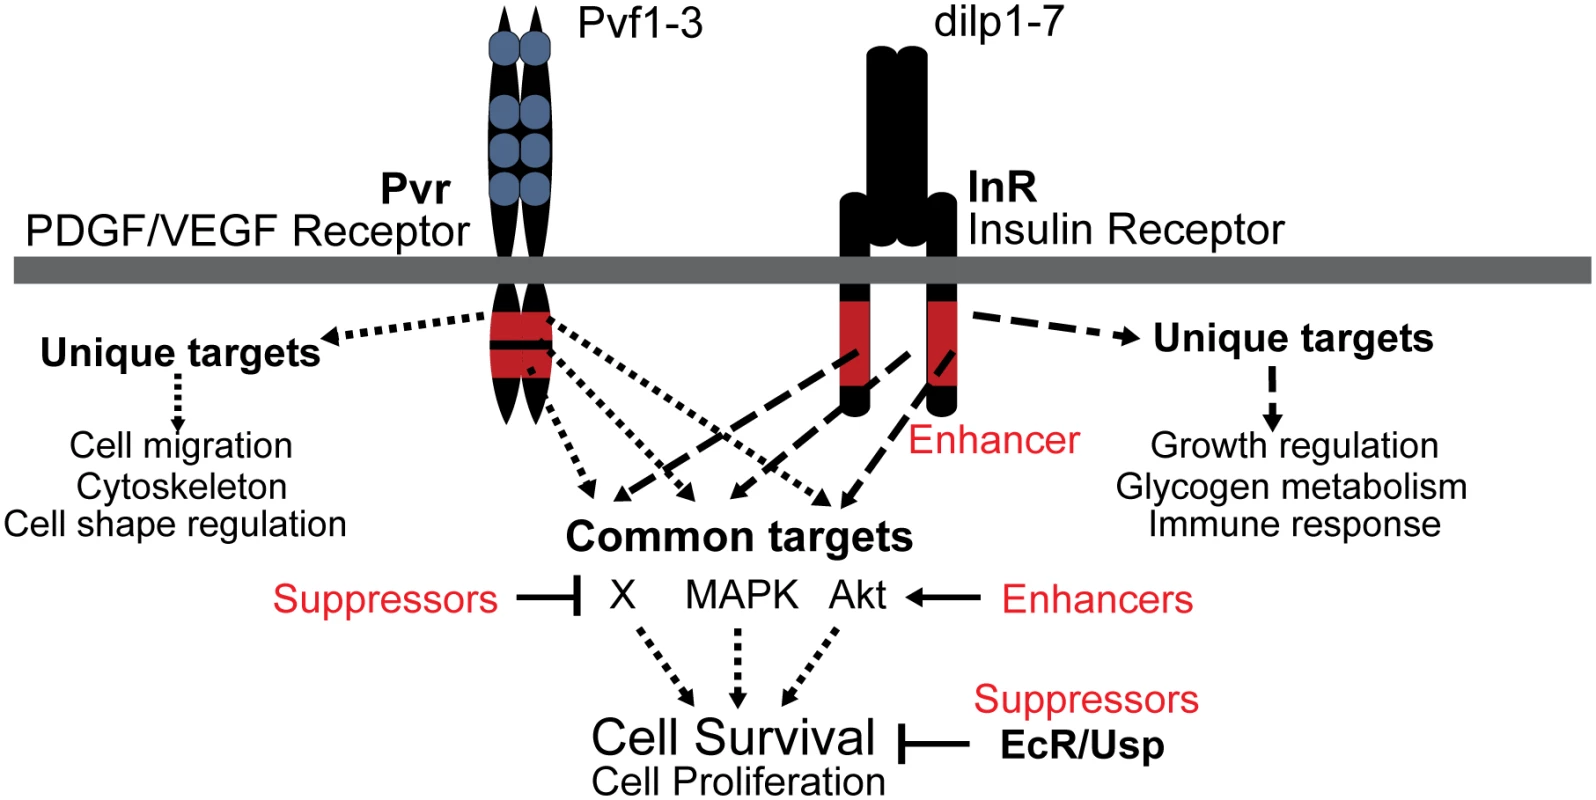 Model of Pvr and InR impact on cell survival control.